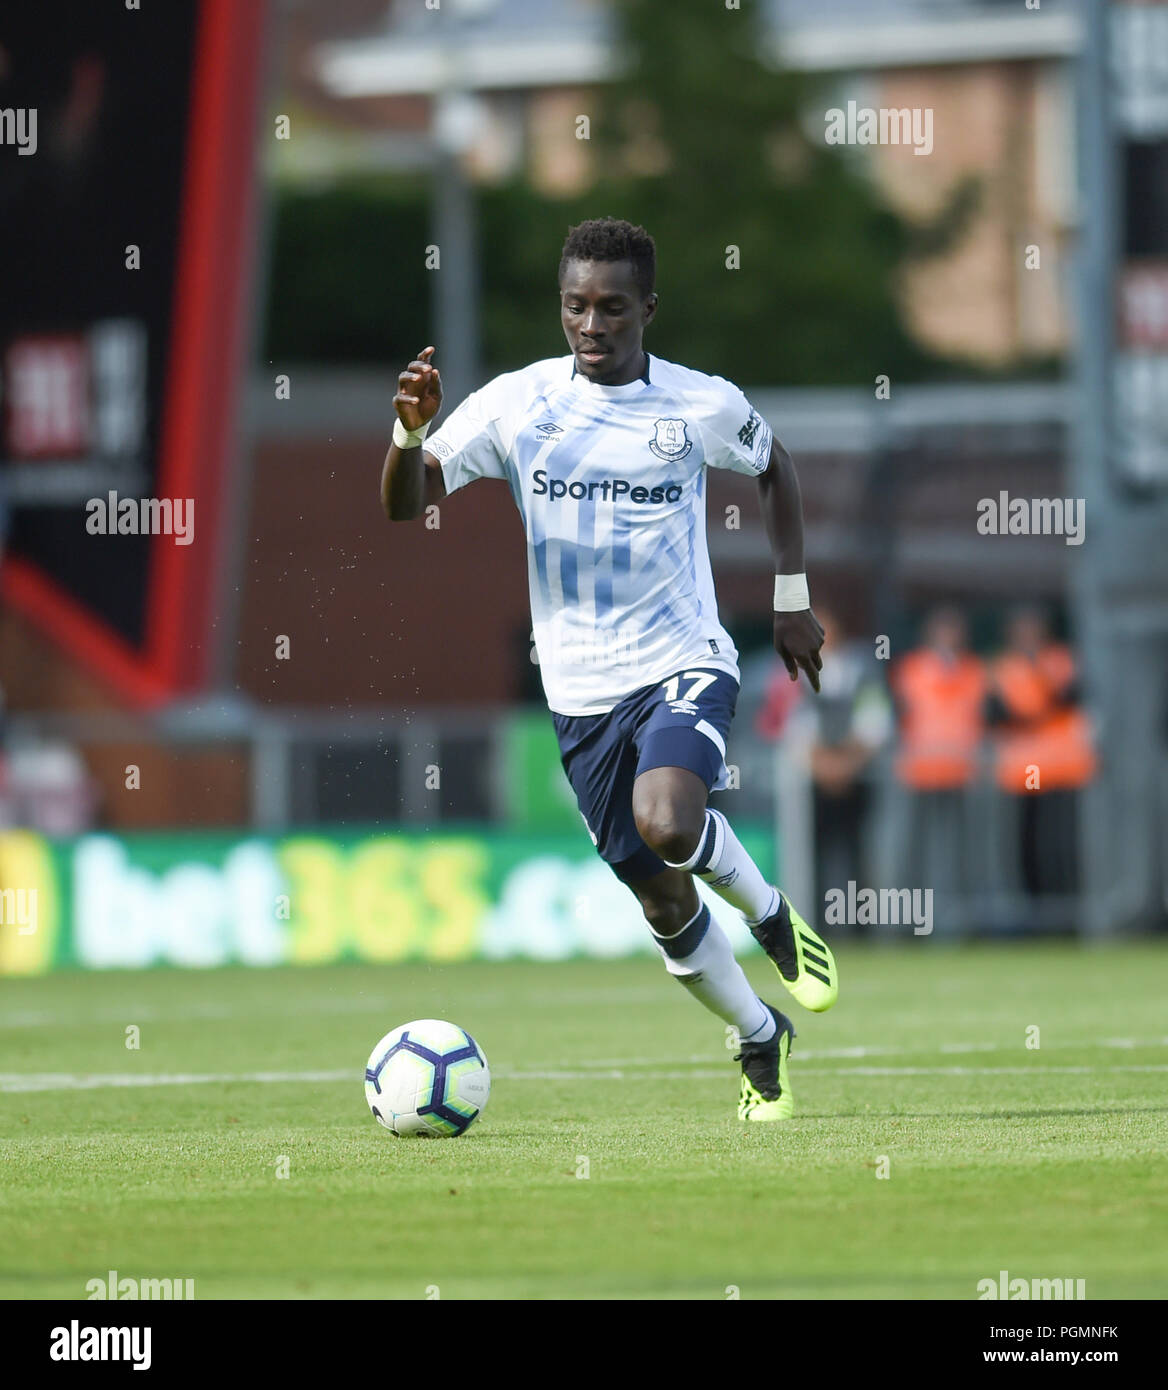 Idrissa Gana Gueye of Everton. during the Premier League match between AFC Bournemouth and Everton at the Vitality Stadium , Bournemouth , 25 Aug 2018 Editorial use only. No merchandising. For Football images FA and Premier League restrictions apply inc. no internet/mobile usage without FAPL license - for details contact Football Dataco Stock Photo